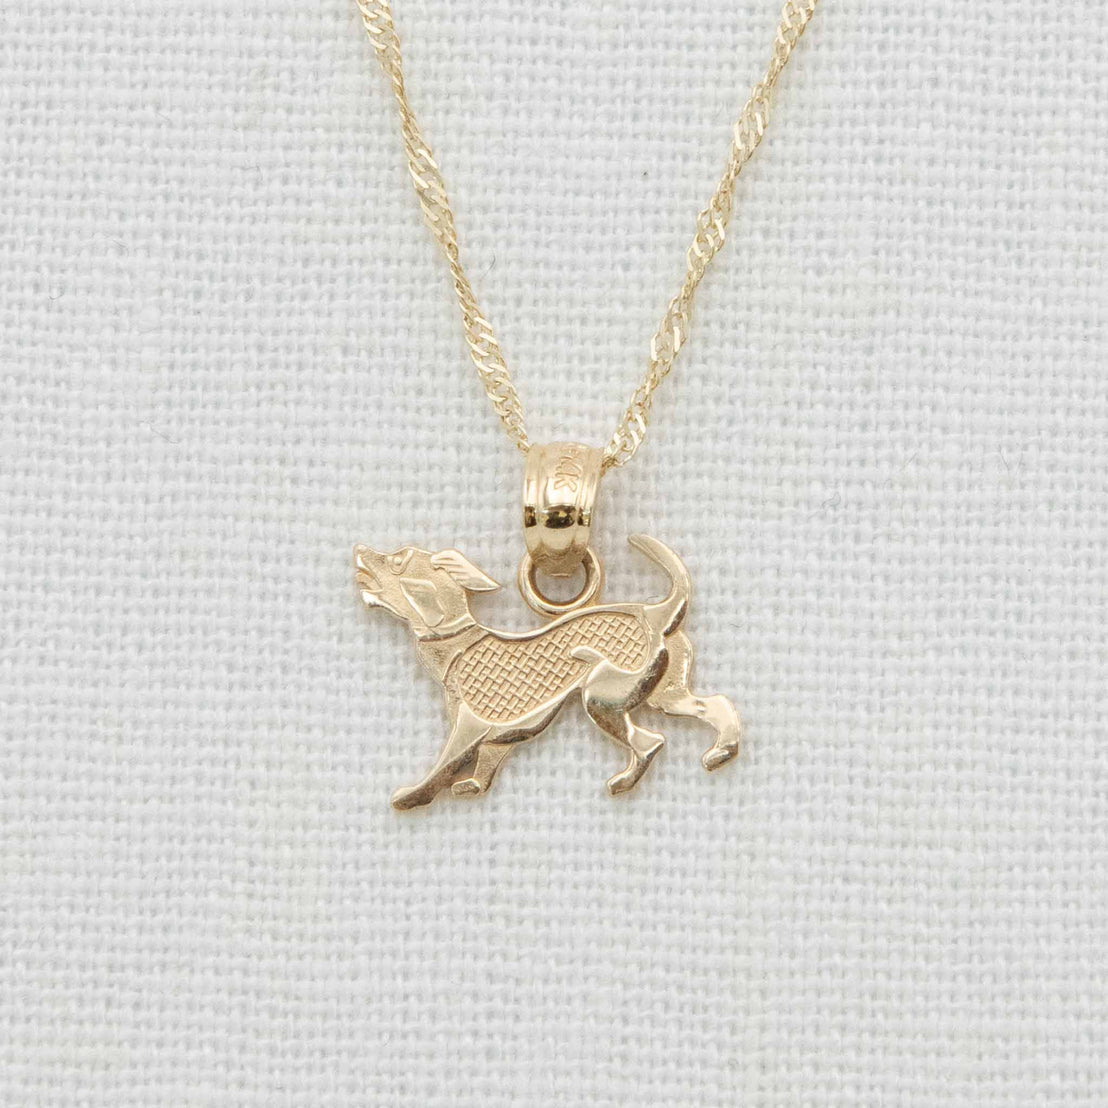 Gold puppy dog charm with chain